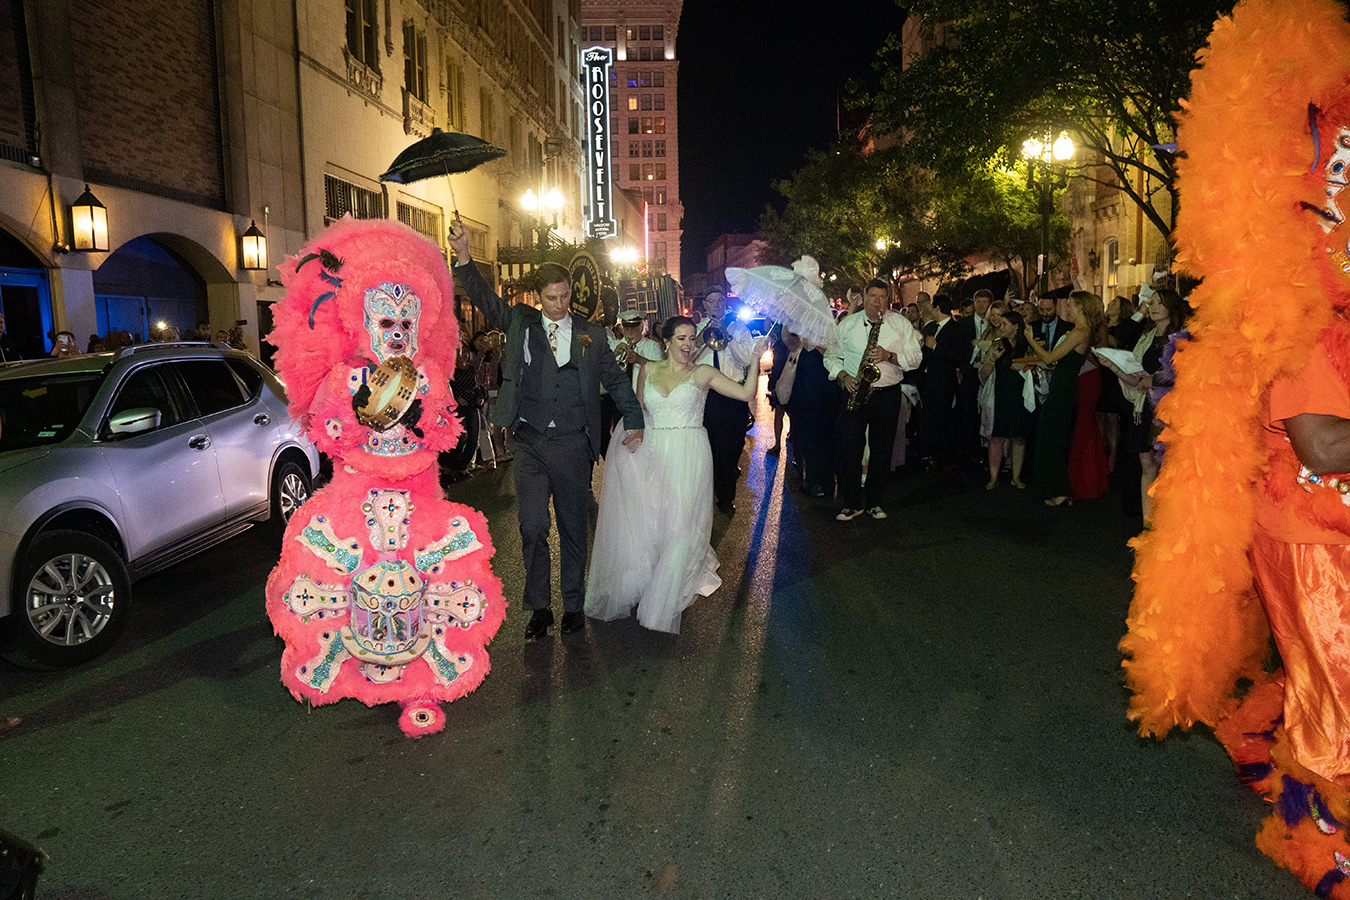 The Storyville Stompers and Mardi Gras Indians led Margaret and Travis' Second Line to the New Orleans Board of Trade.